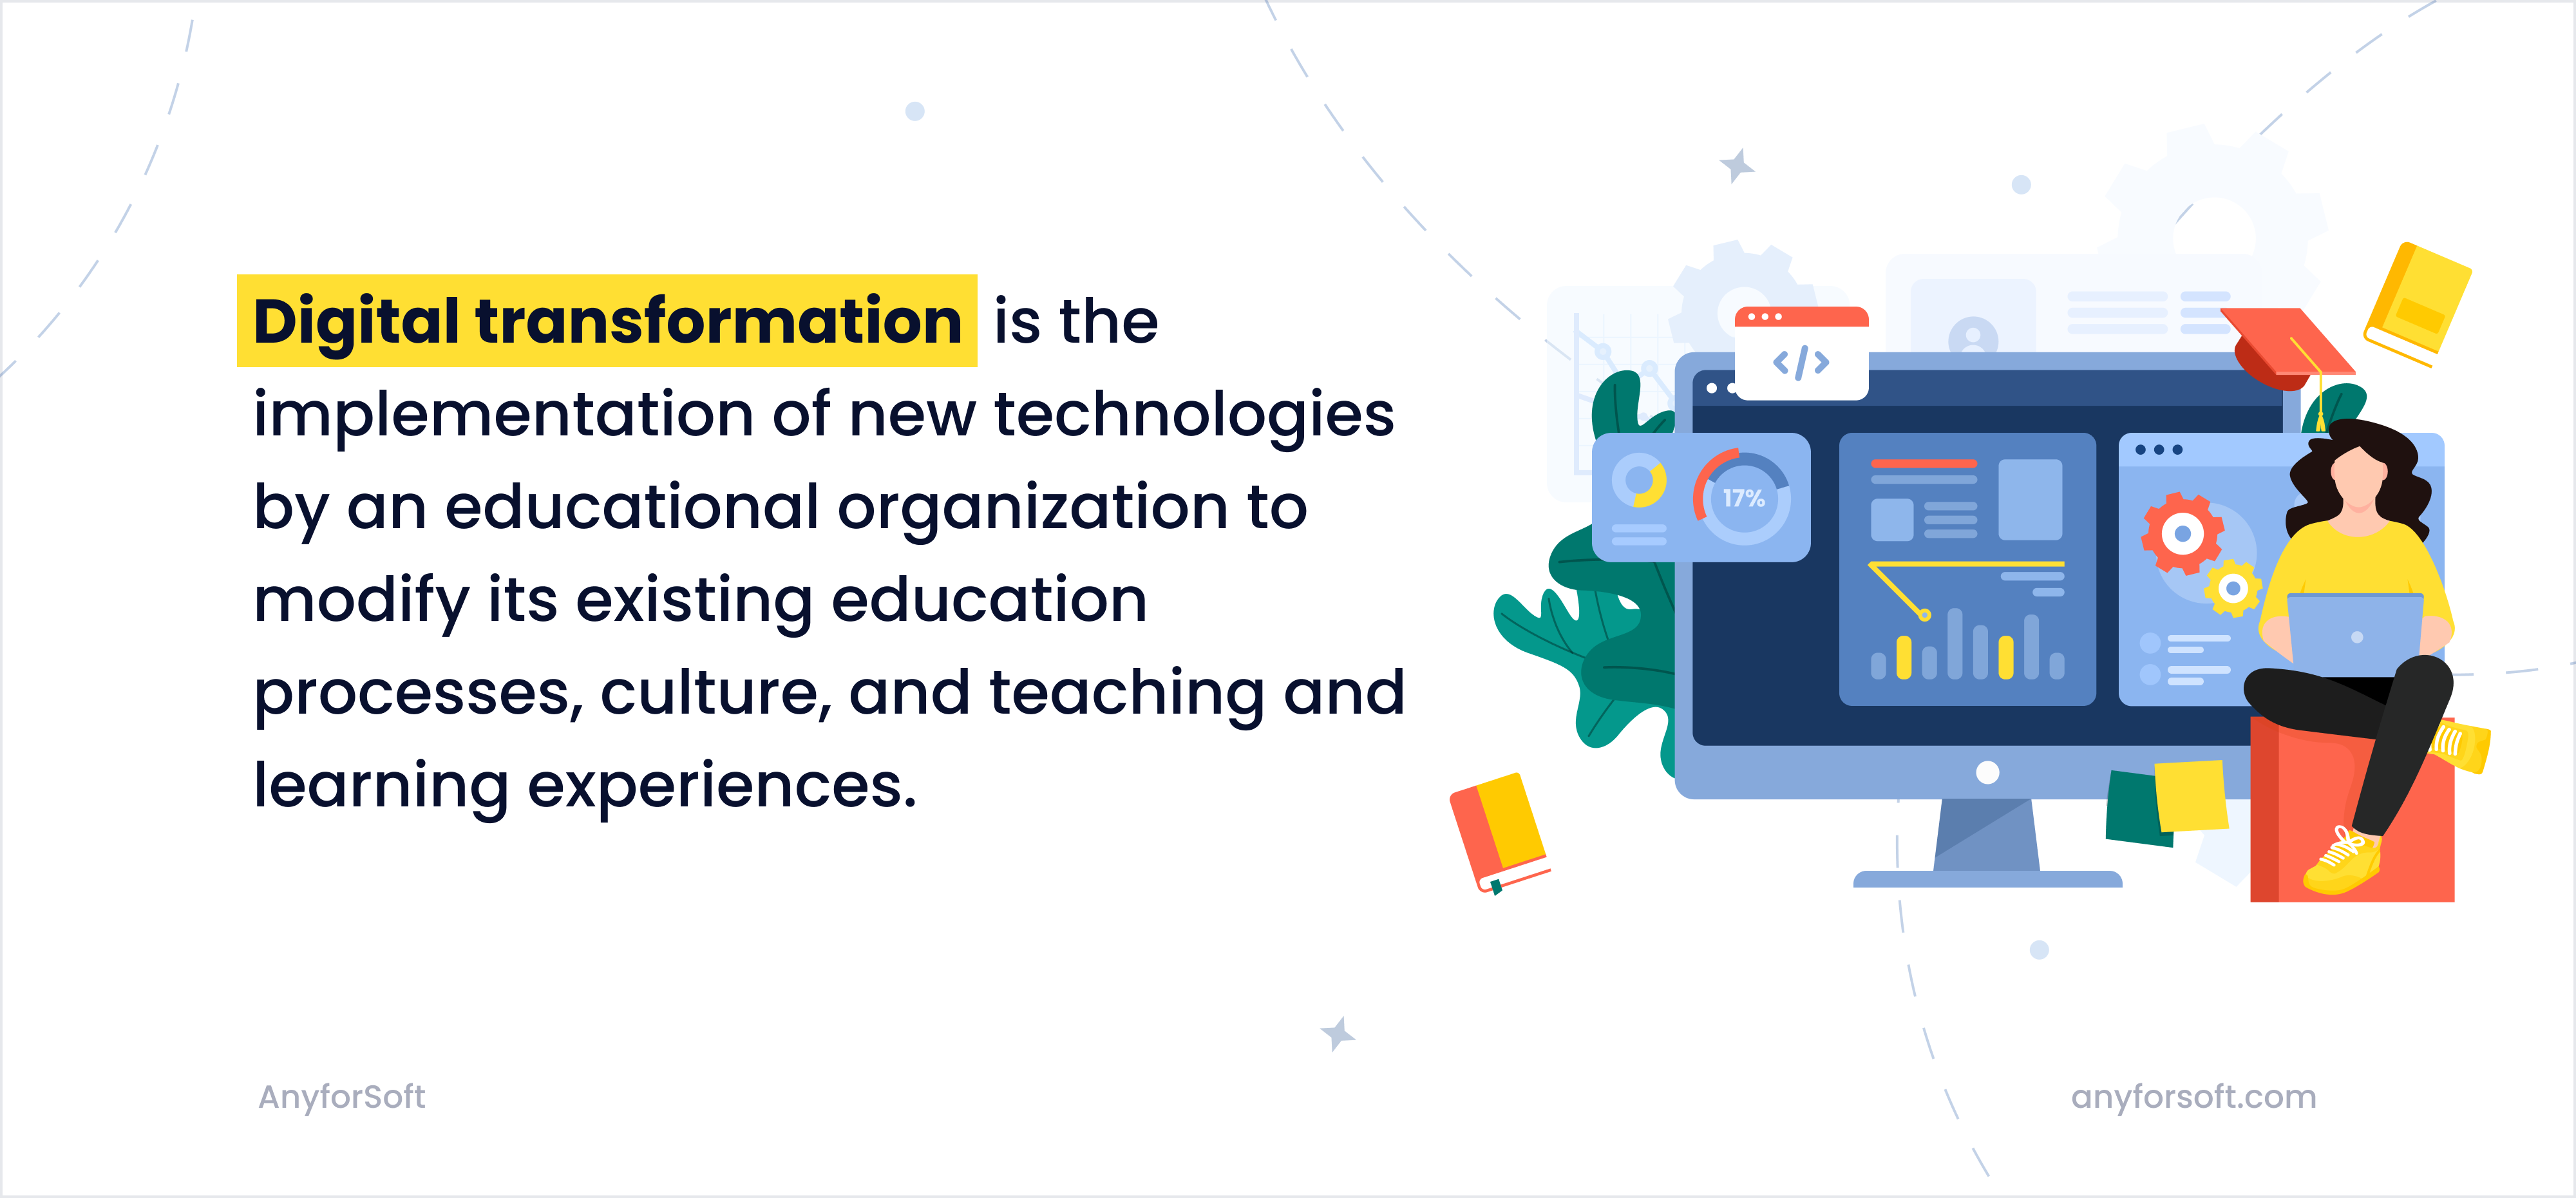 What is digital transformation in higher education